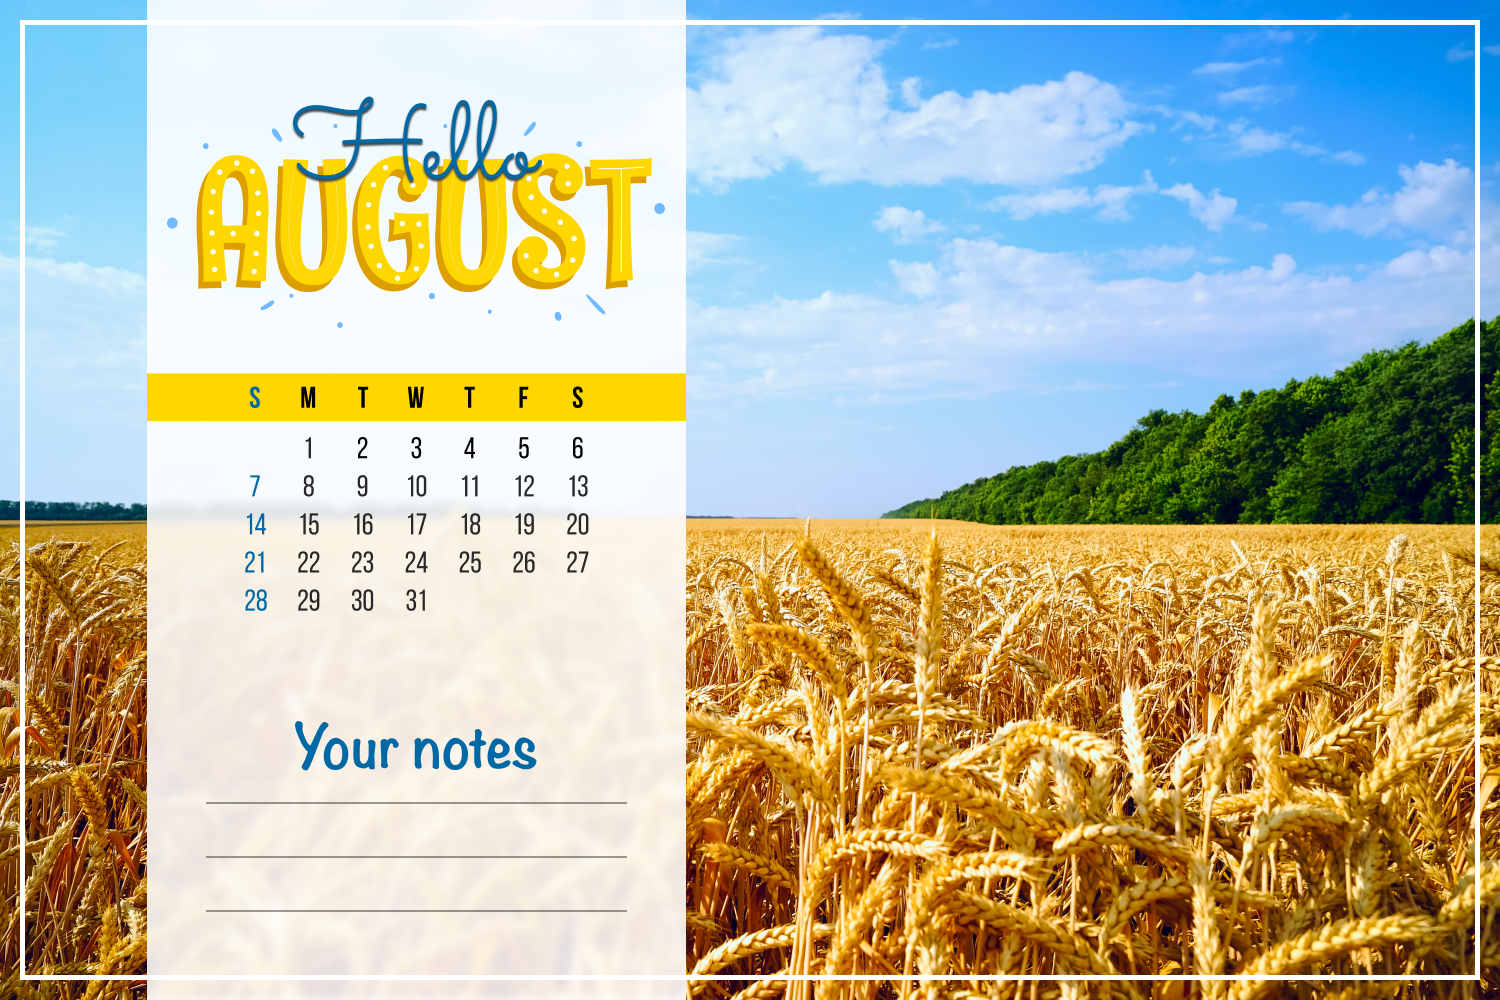 Calendar against the background of a field with ripe wheat.